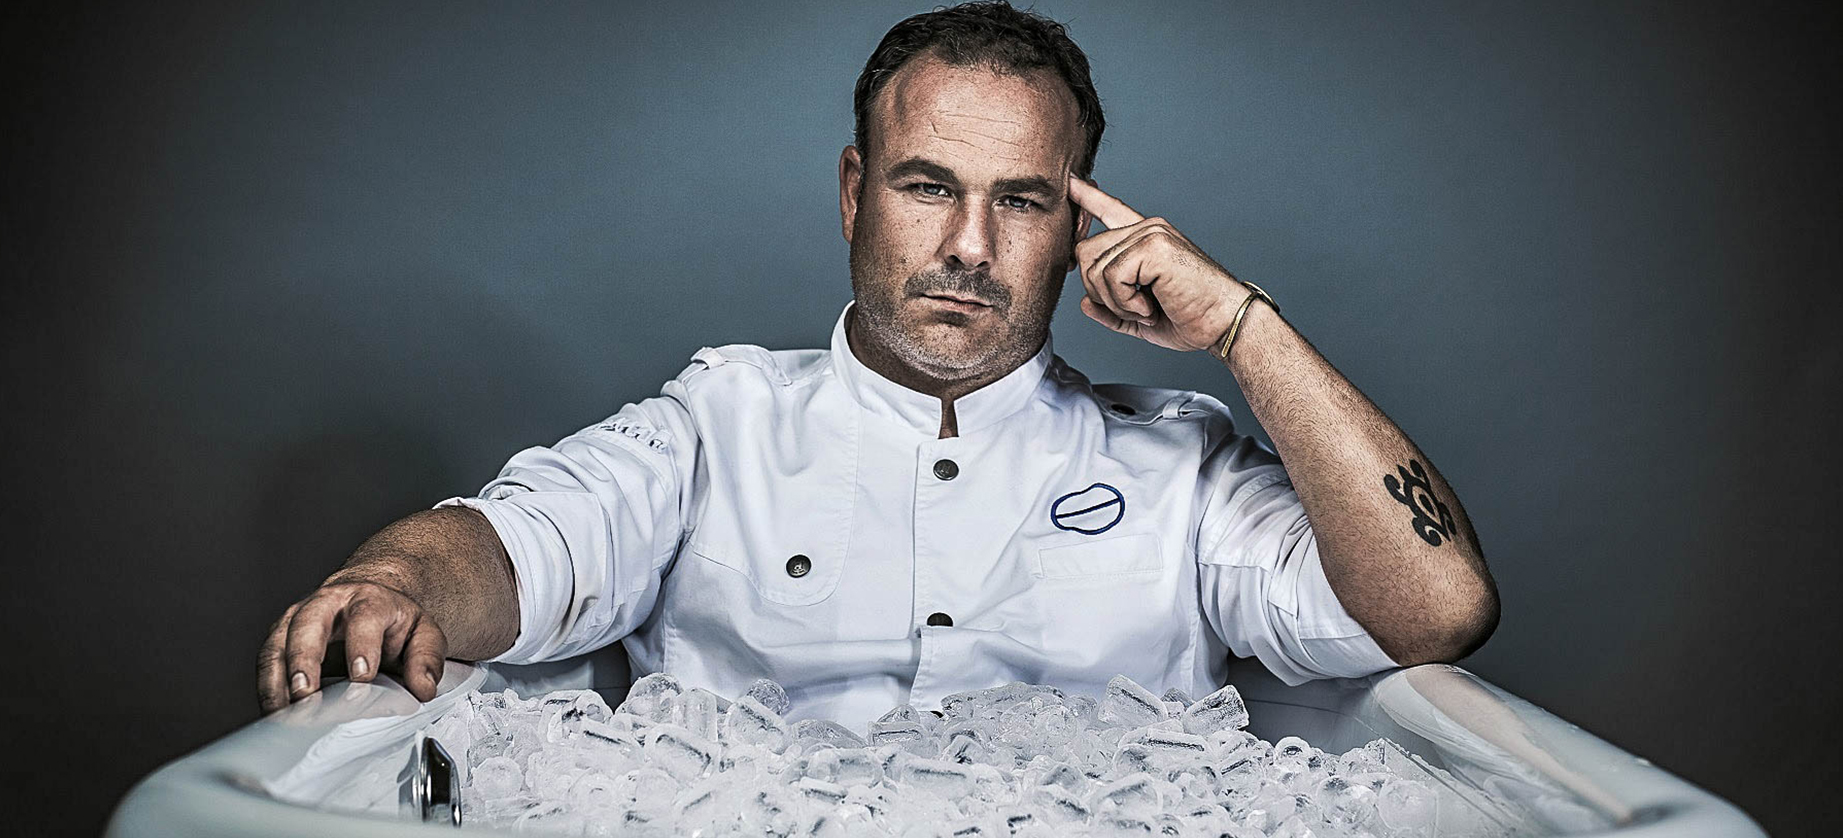 Portrait of Ángel León - star chef and owner of the 3-star restaurant Aponiente